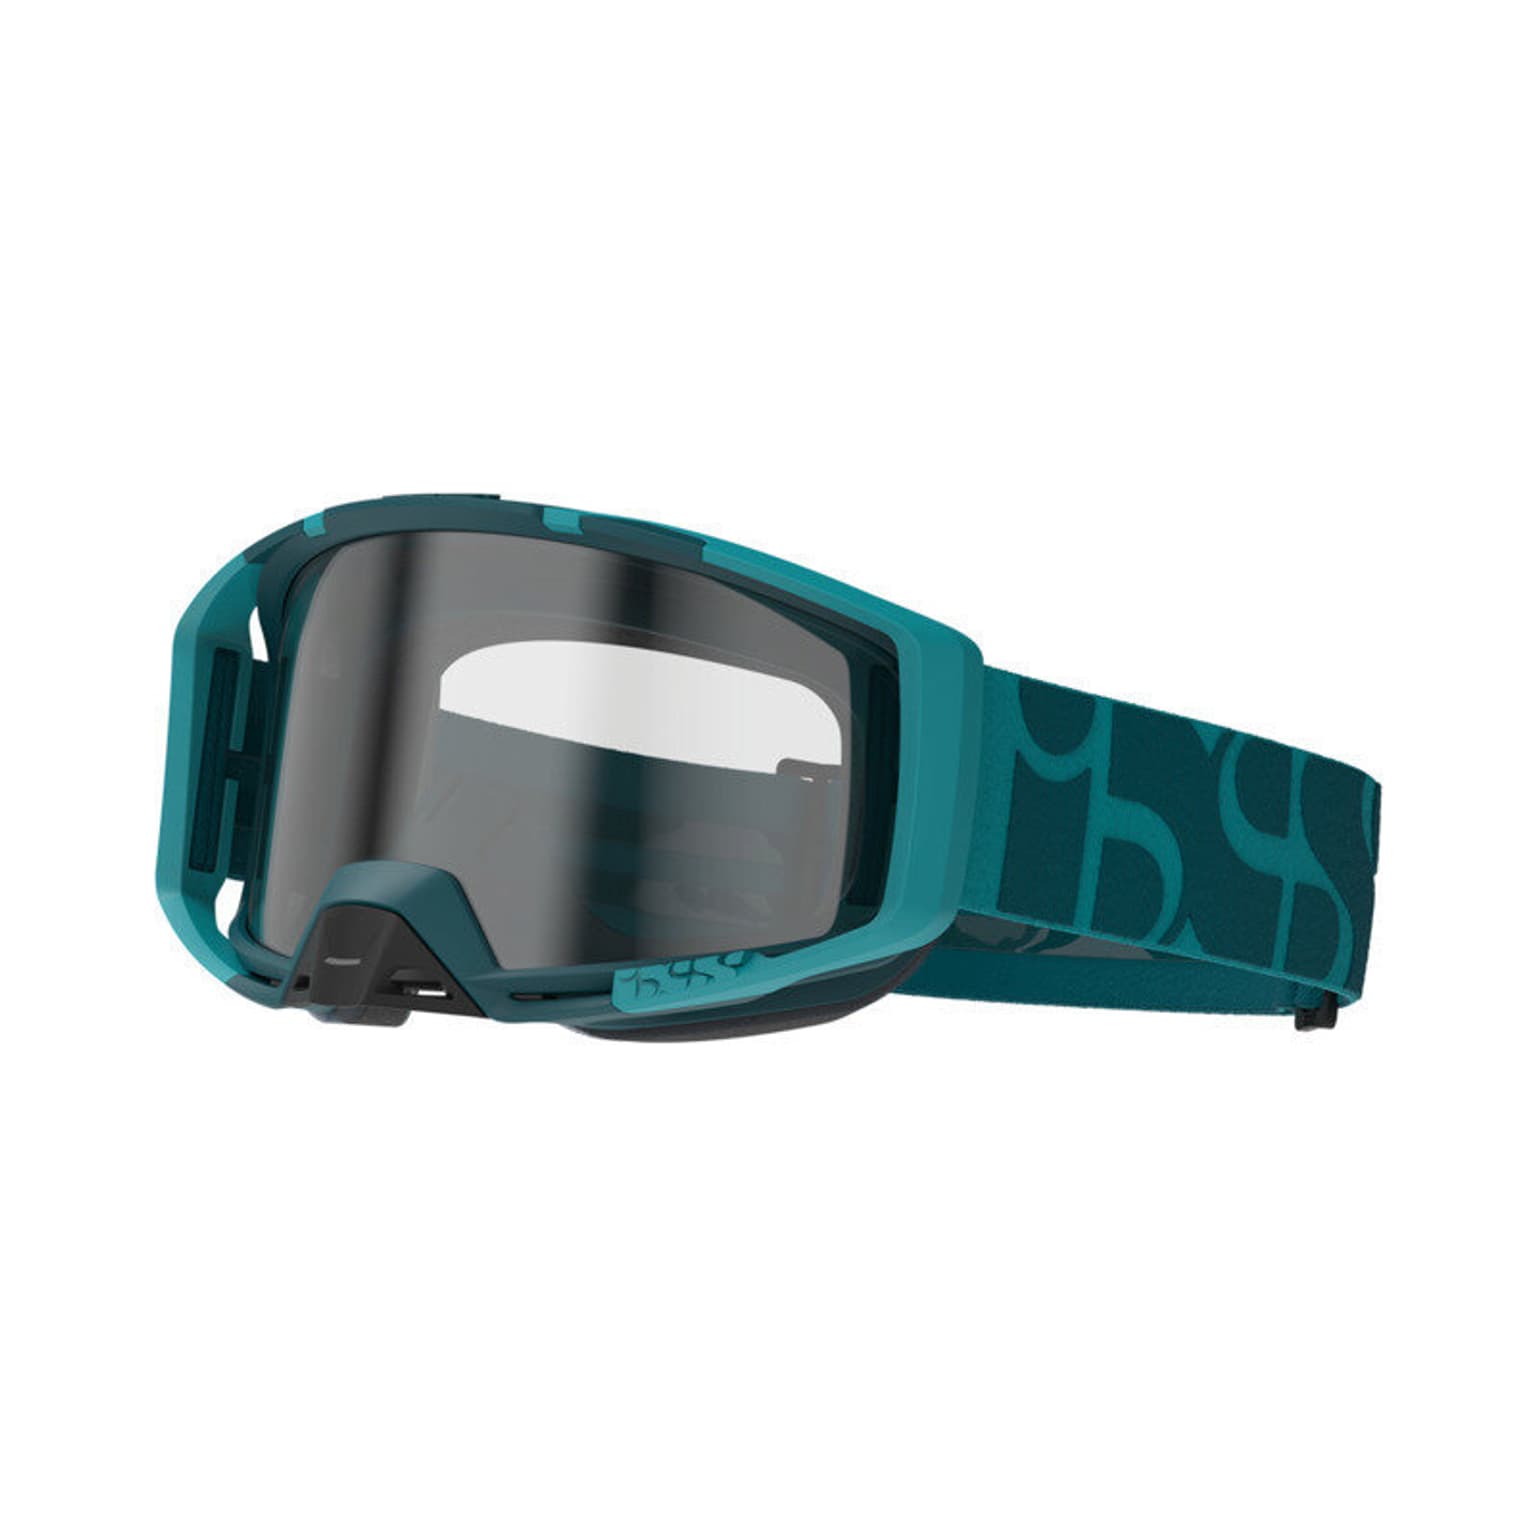 iXS iXS Trigger clear Lunettes VTT turquoise 3